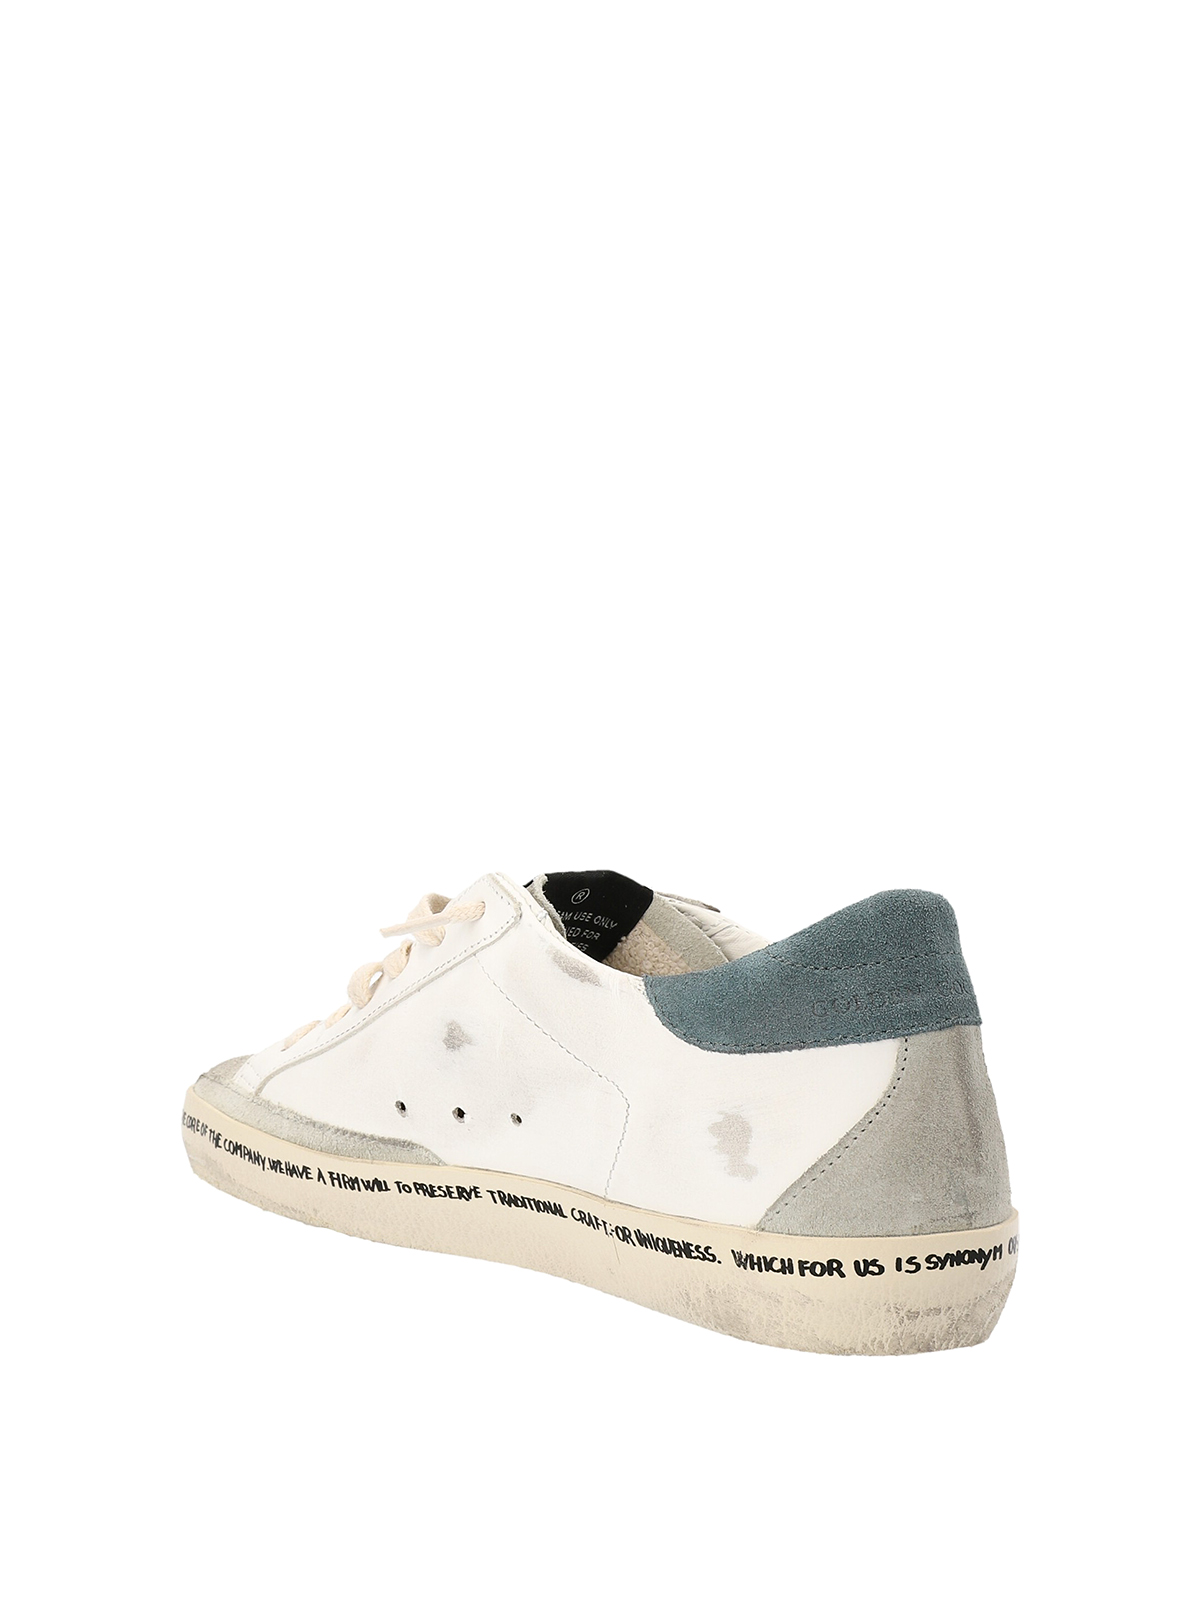 FOUR Amsterdam - The @maisonmargiela Tabi has almost become a synonym for  the brand. Martin Margiela was inspired by the split-toe sock known to  Japanese culture and has made his shoes a